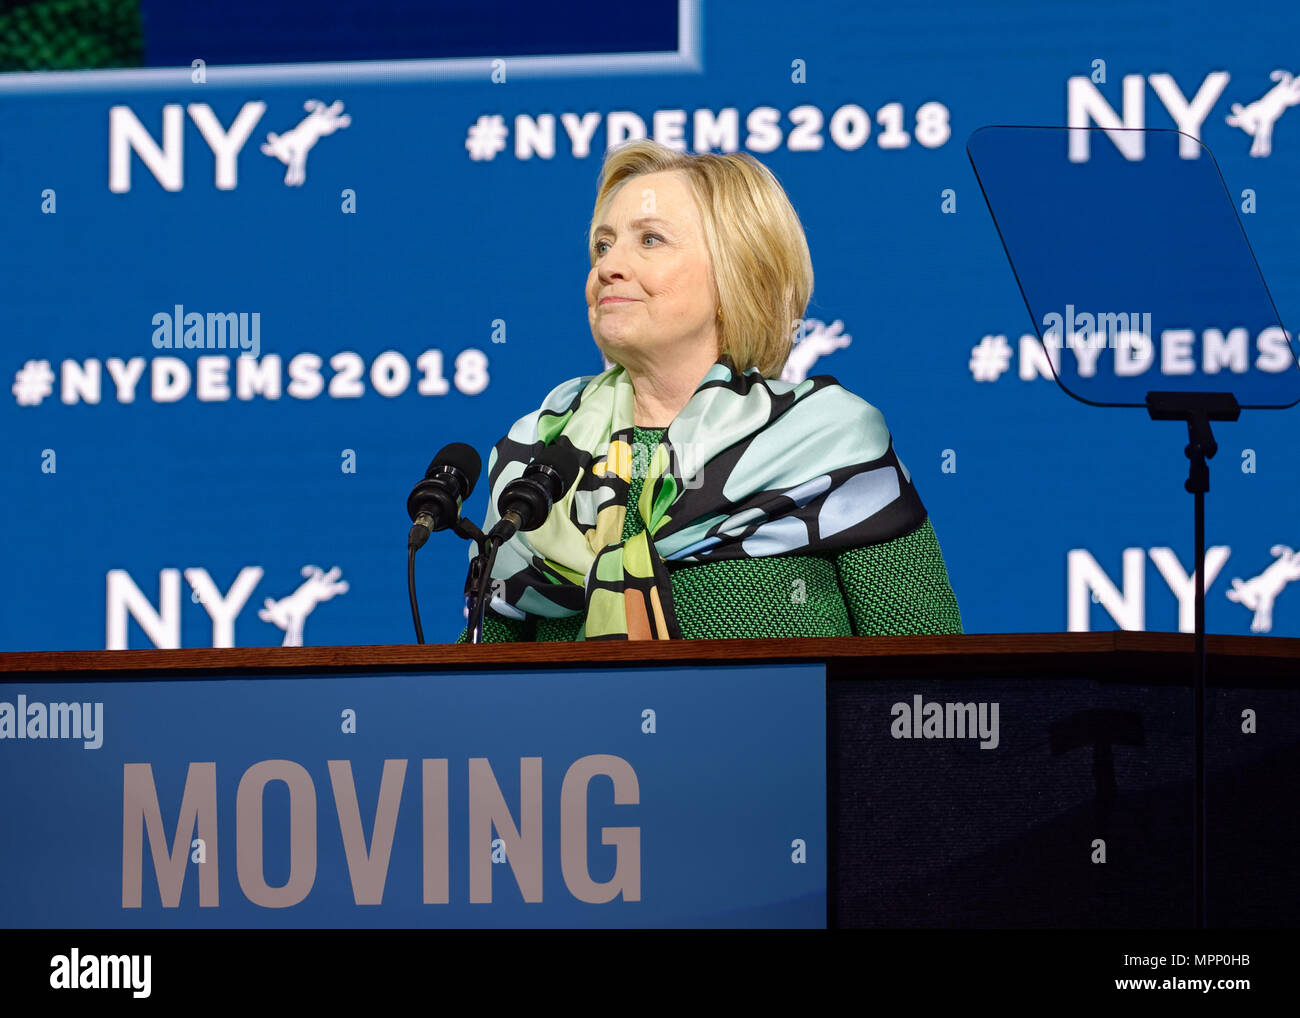 Long Island, USA. 23rd May, 2018. HILLARY CLINTON, with lips pursed, delivers Keynote Address during Day 1 of New York State Democratic Convention, held at Hofstra University on Long Island. Clinton, the former First Lady and NYS Senator, endorsed the re-election of Gov. A. Cuomo for a third term, and mentioned how Hofstra was the site of her first 2016 debate with Trump. Credit: Ann E Parry/Alamy Live News Stock Photo